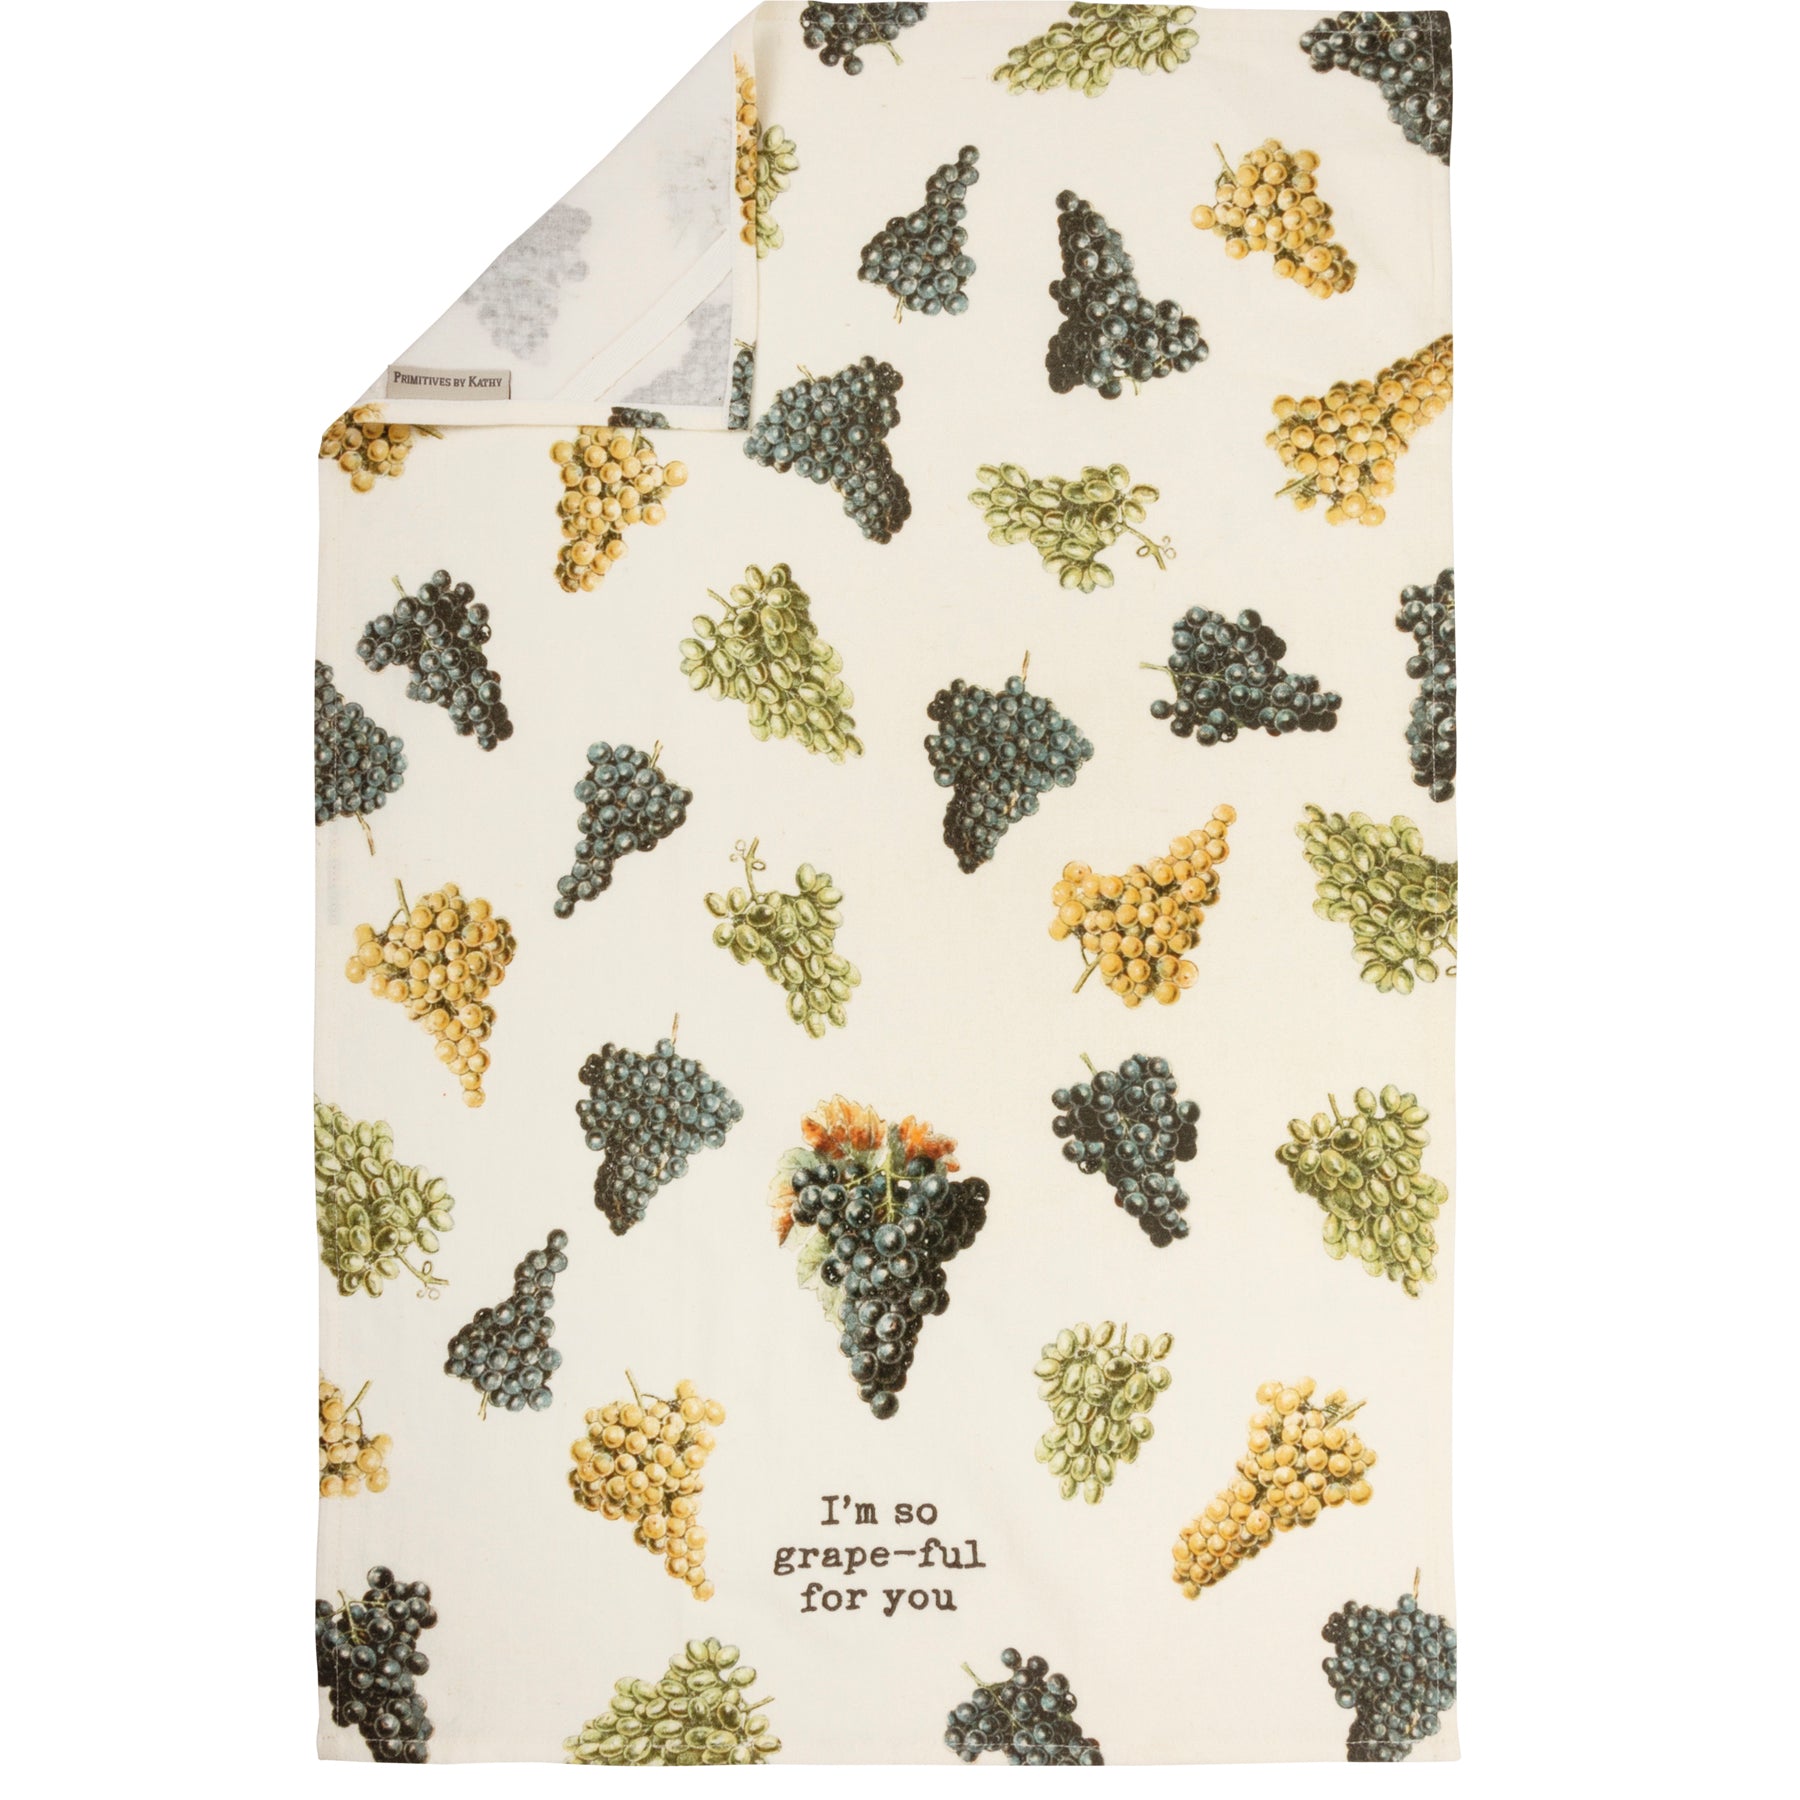 I'm So Grape-ful For You Dish Cloth Towel | Cotten Linen Novelty Tea Towel | Embroidered Text | 18" x 28"